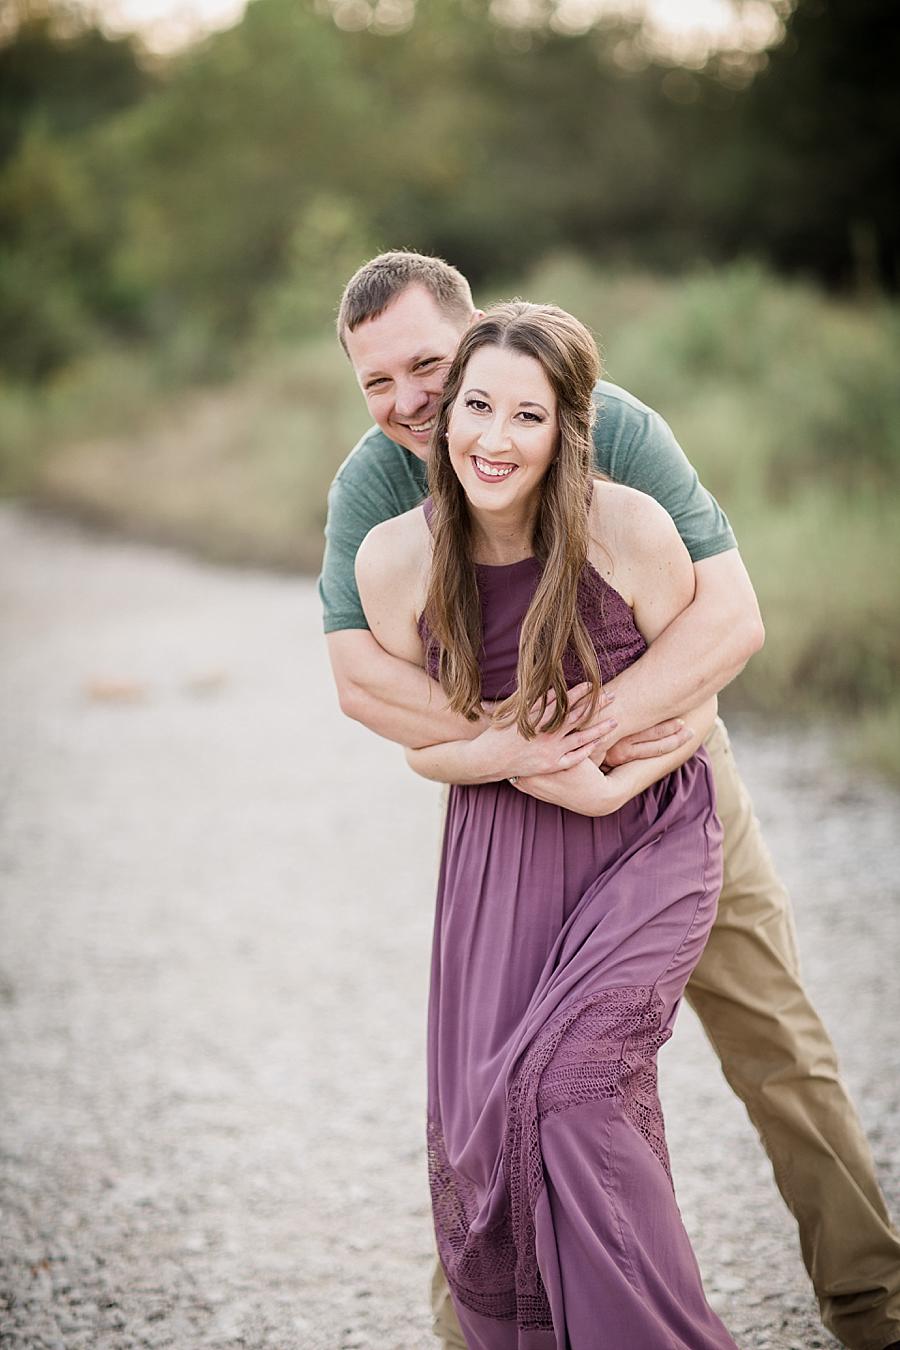 Hug from behind at this Meads Quarry Family Session by Knoxville Wedding Photographer, Amanda May Photos.